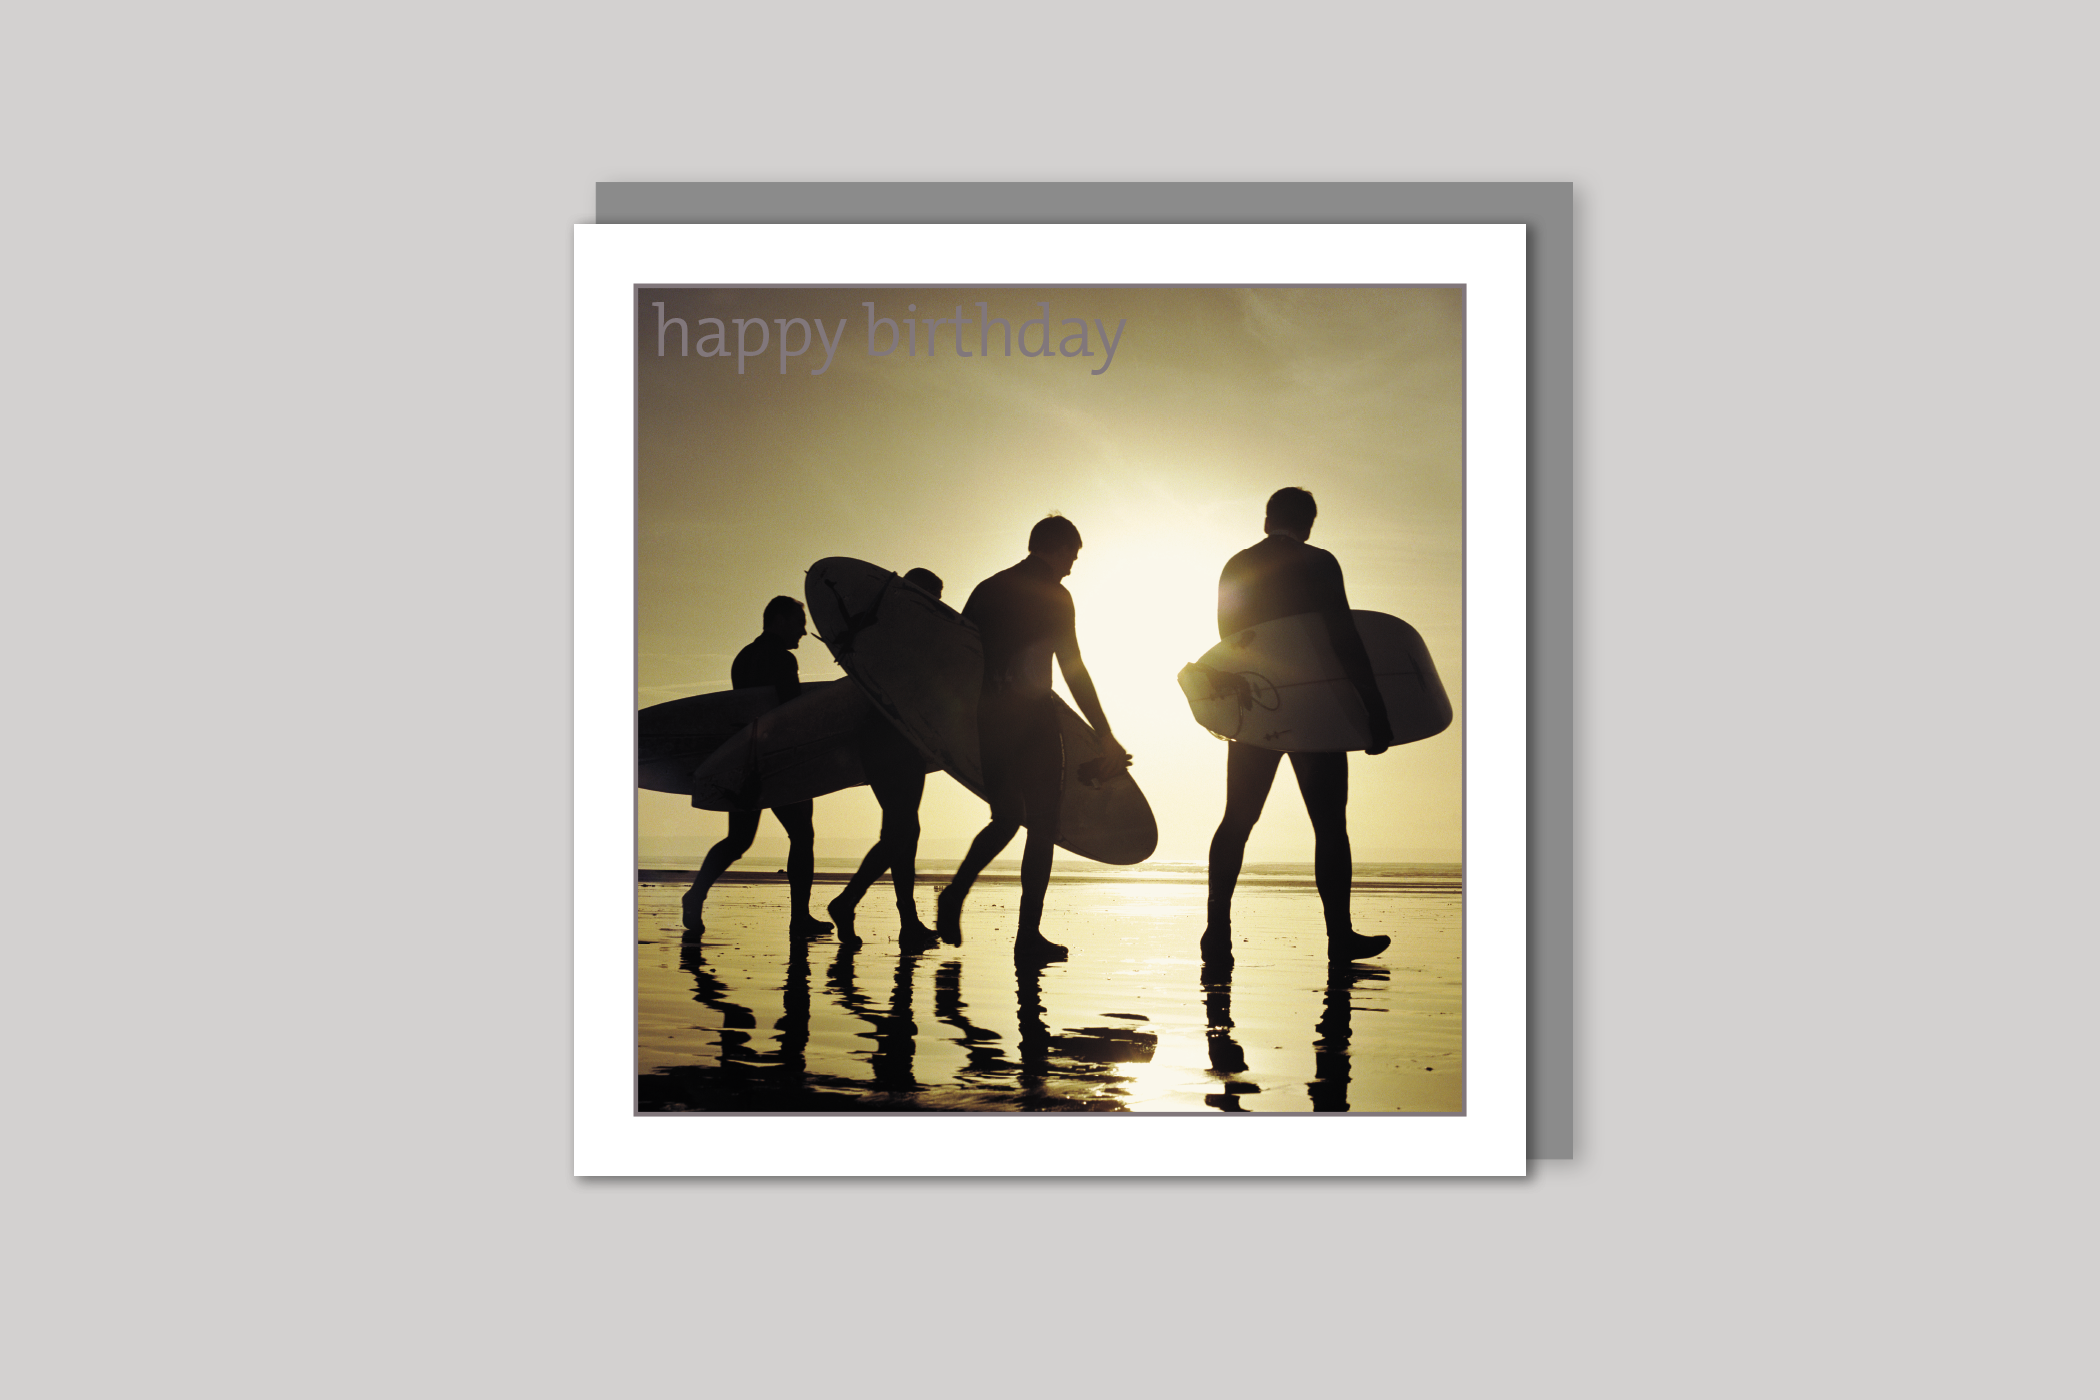 Sunset Surfers from Exposure Silver Edition range of greeting cards by Icon, back page.